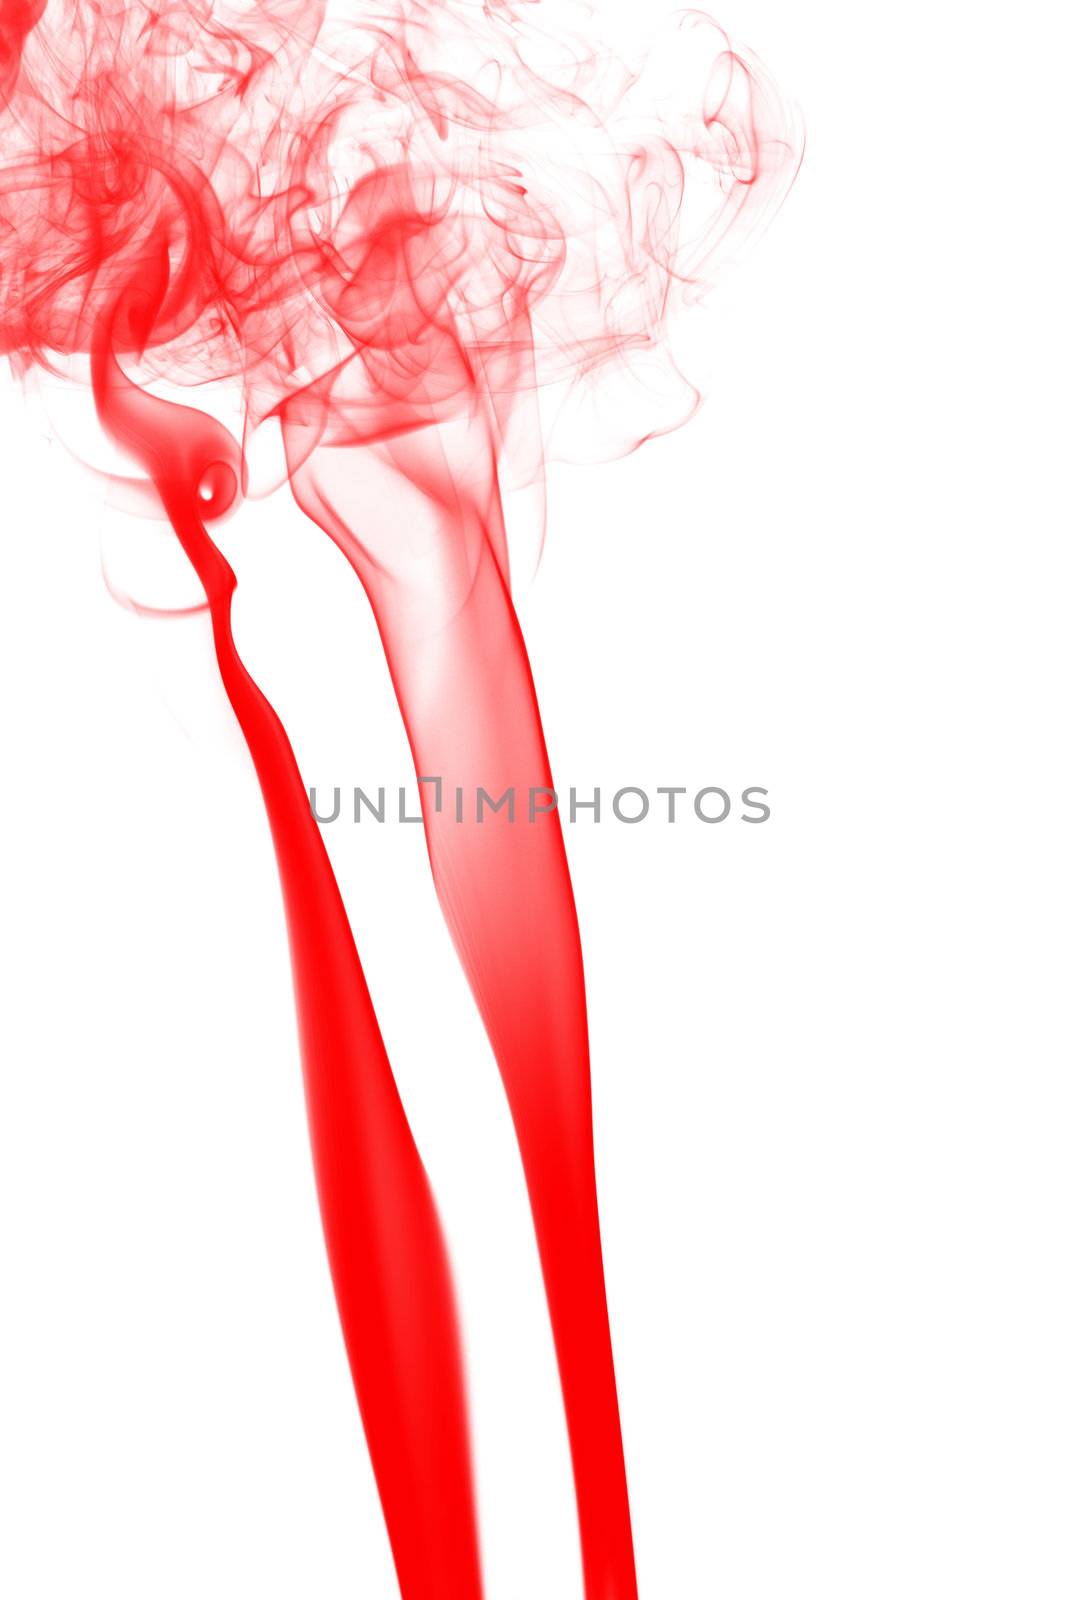 red smoke in white background